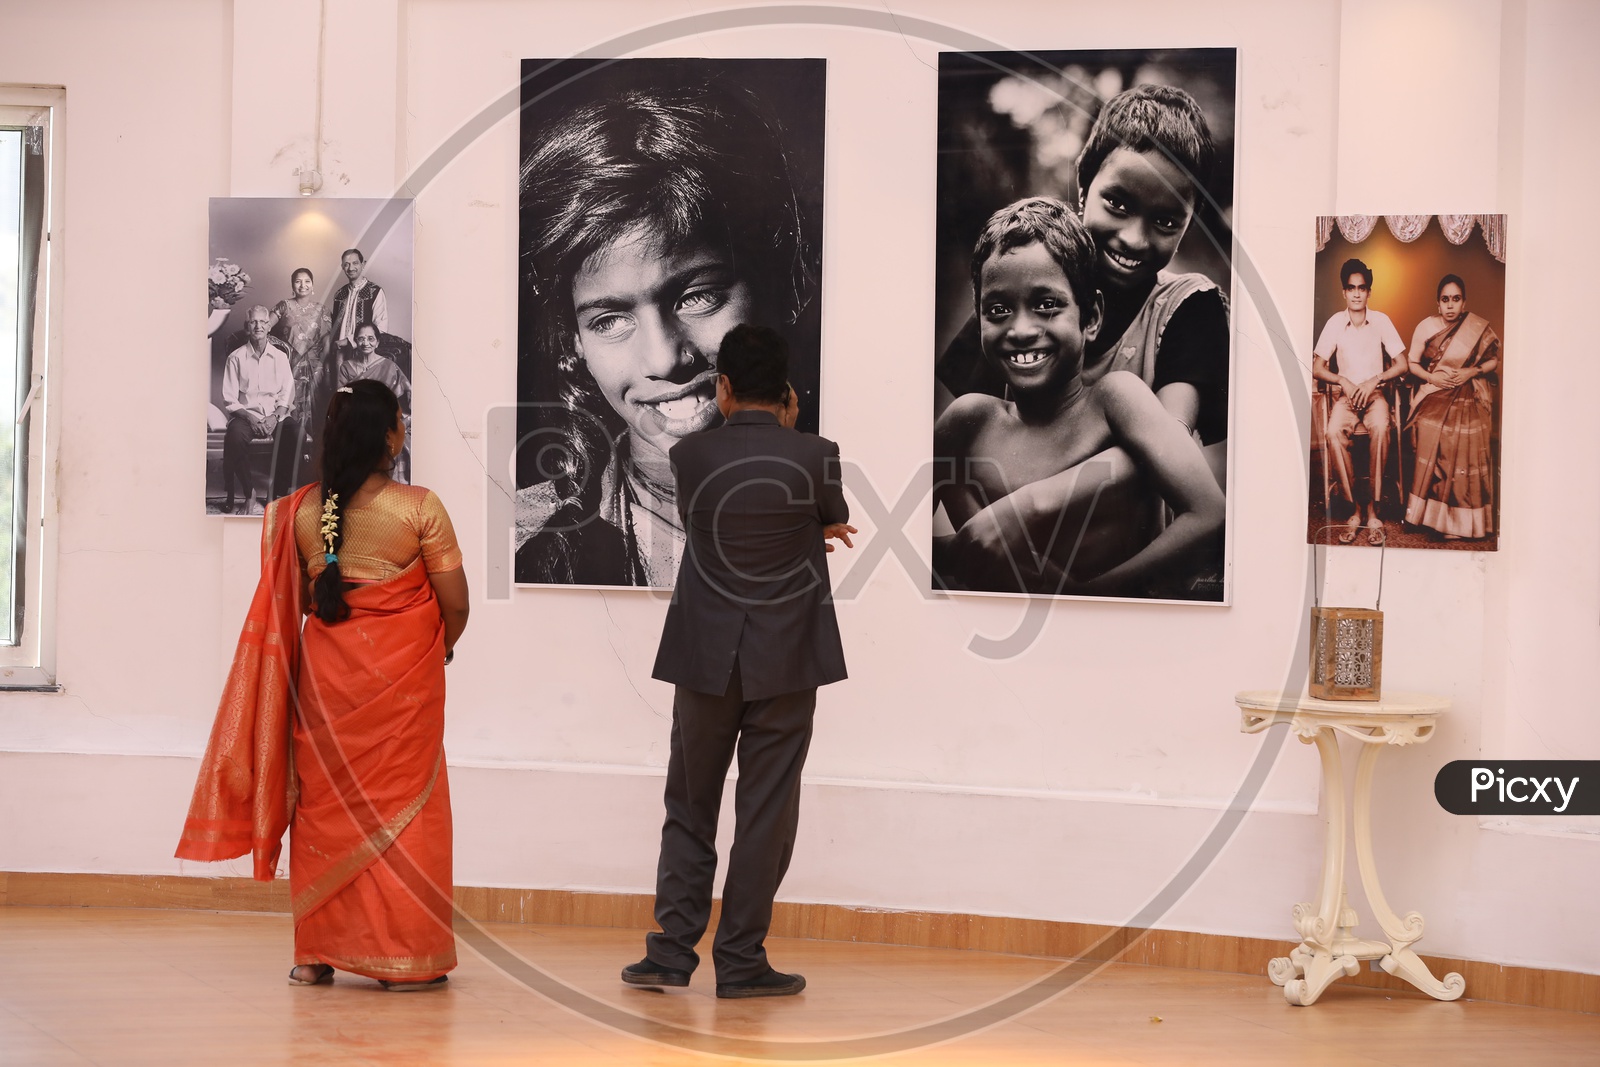 Visitors watching The Photographs in an Art Gallery